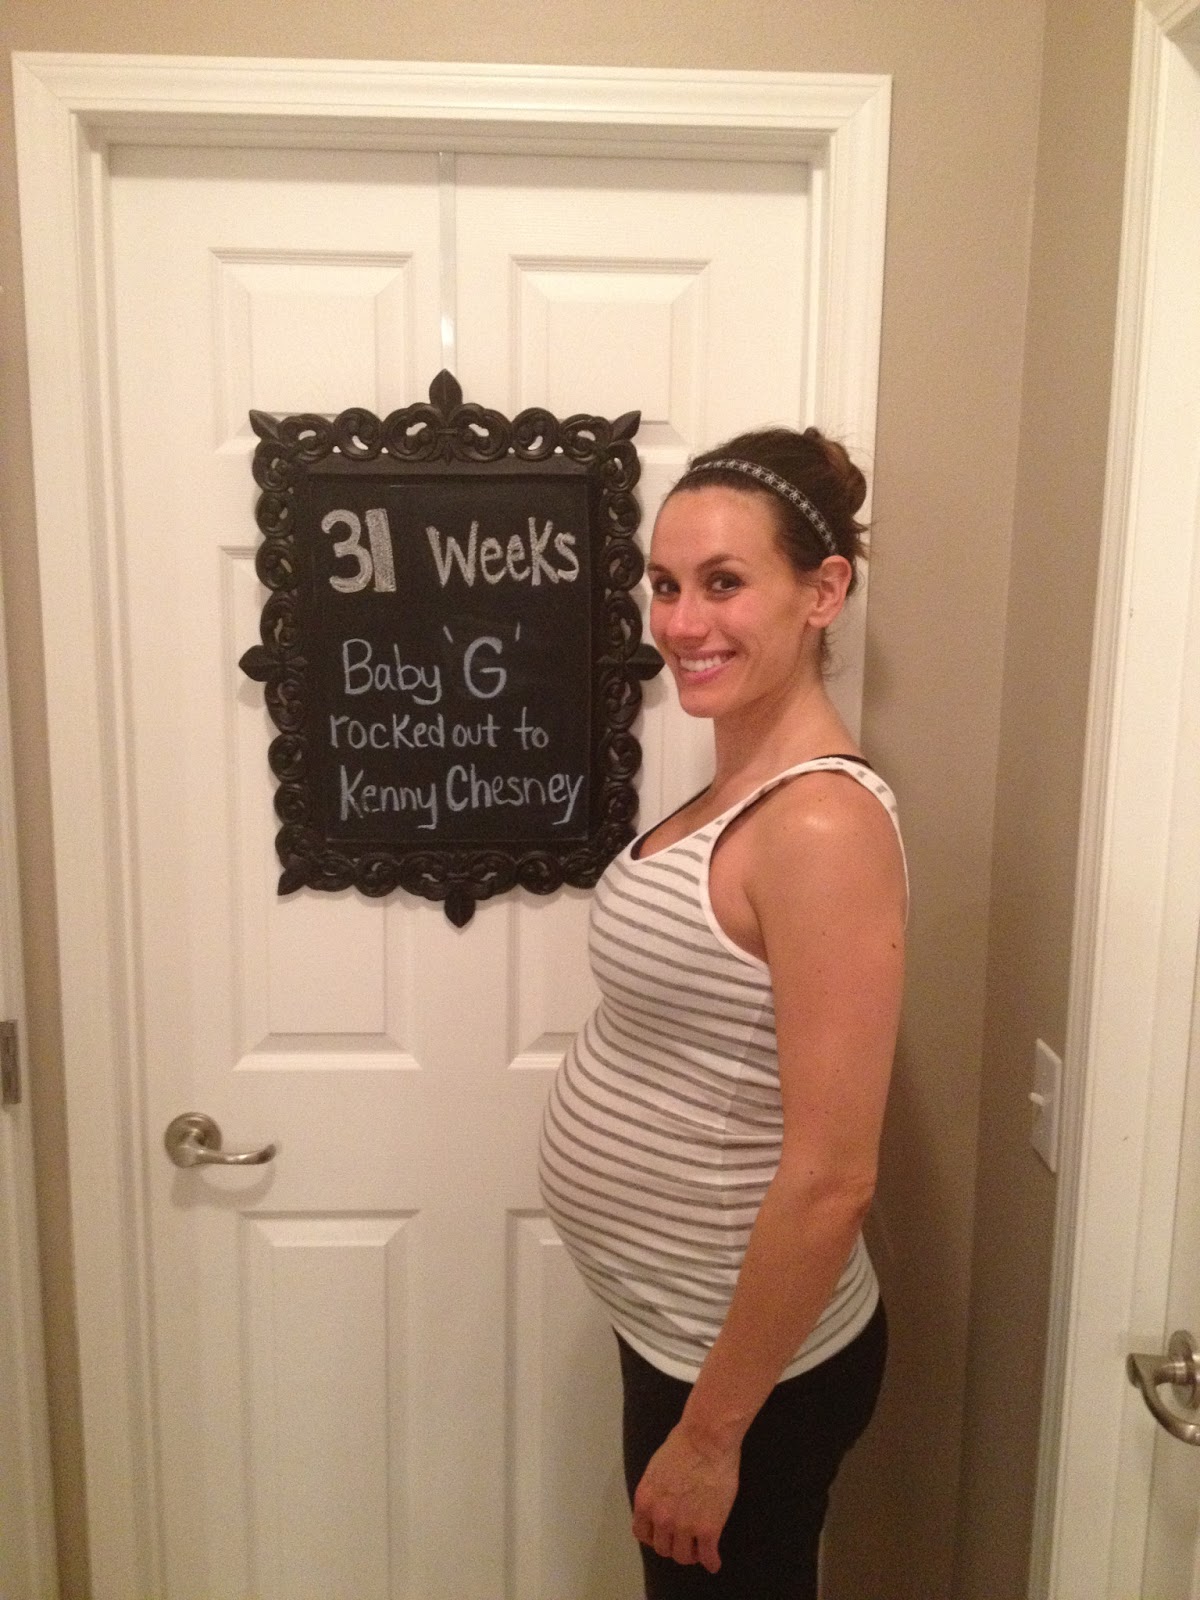 Baby Development During 31 Weeks: What You Need to Know